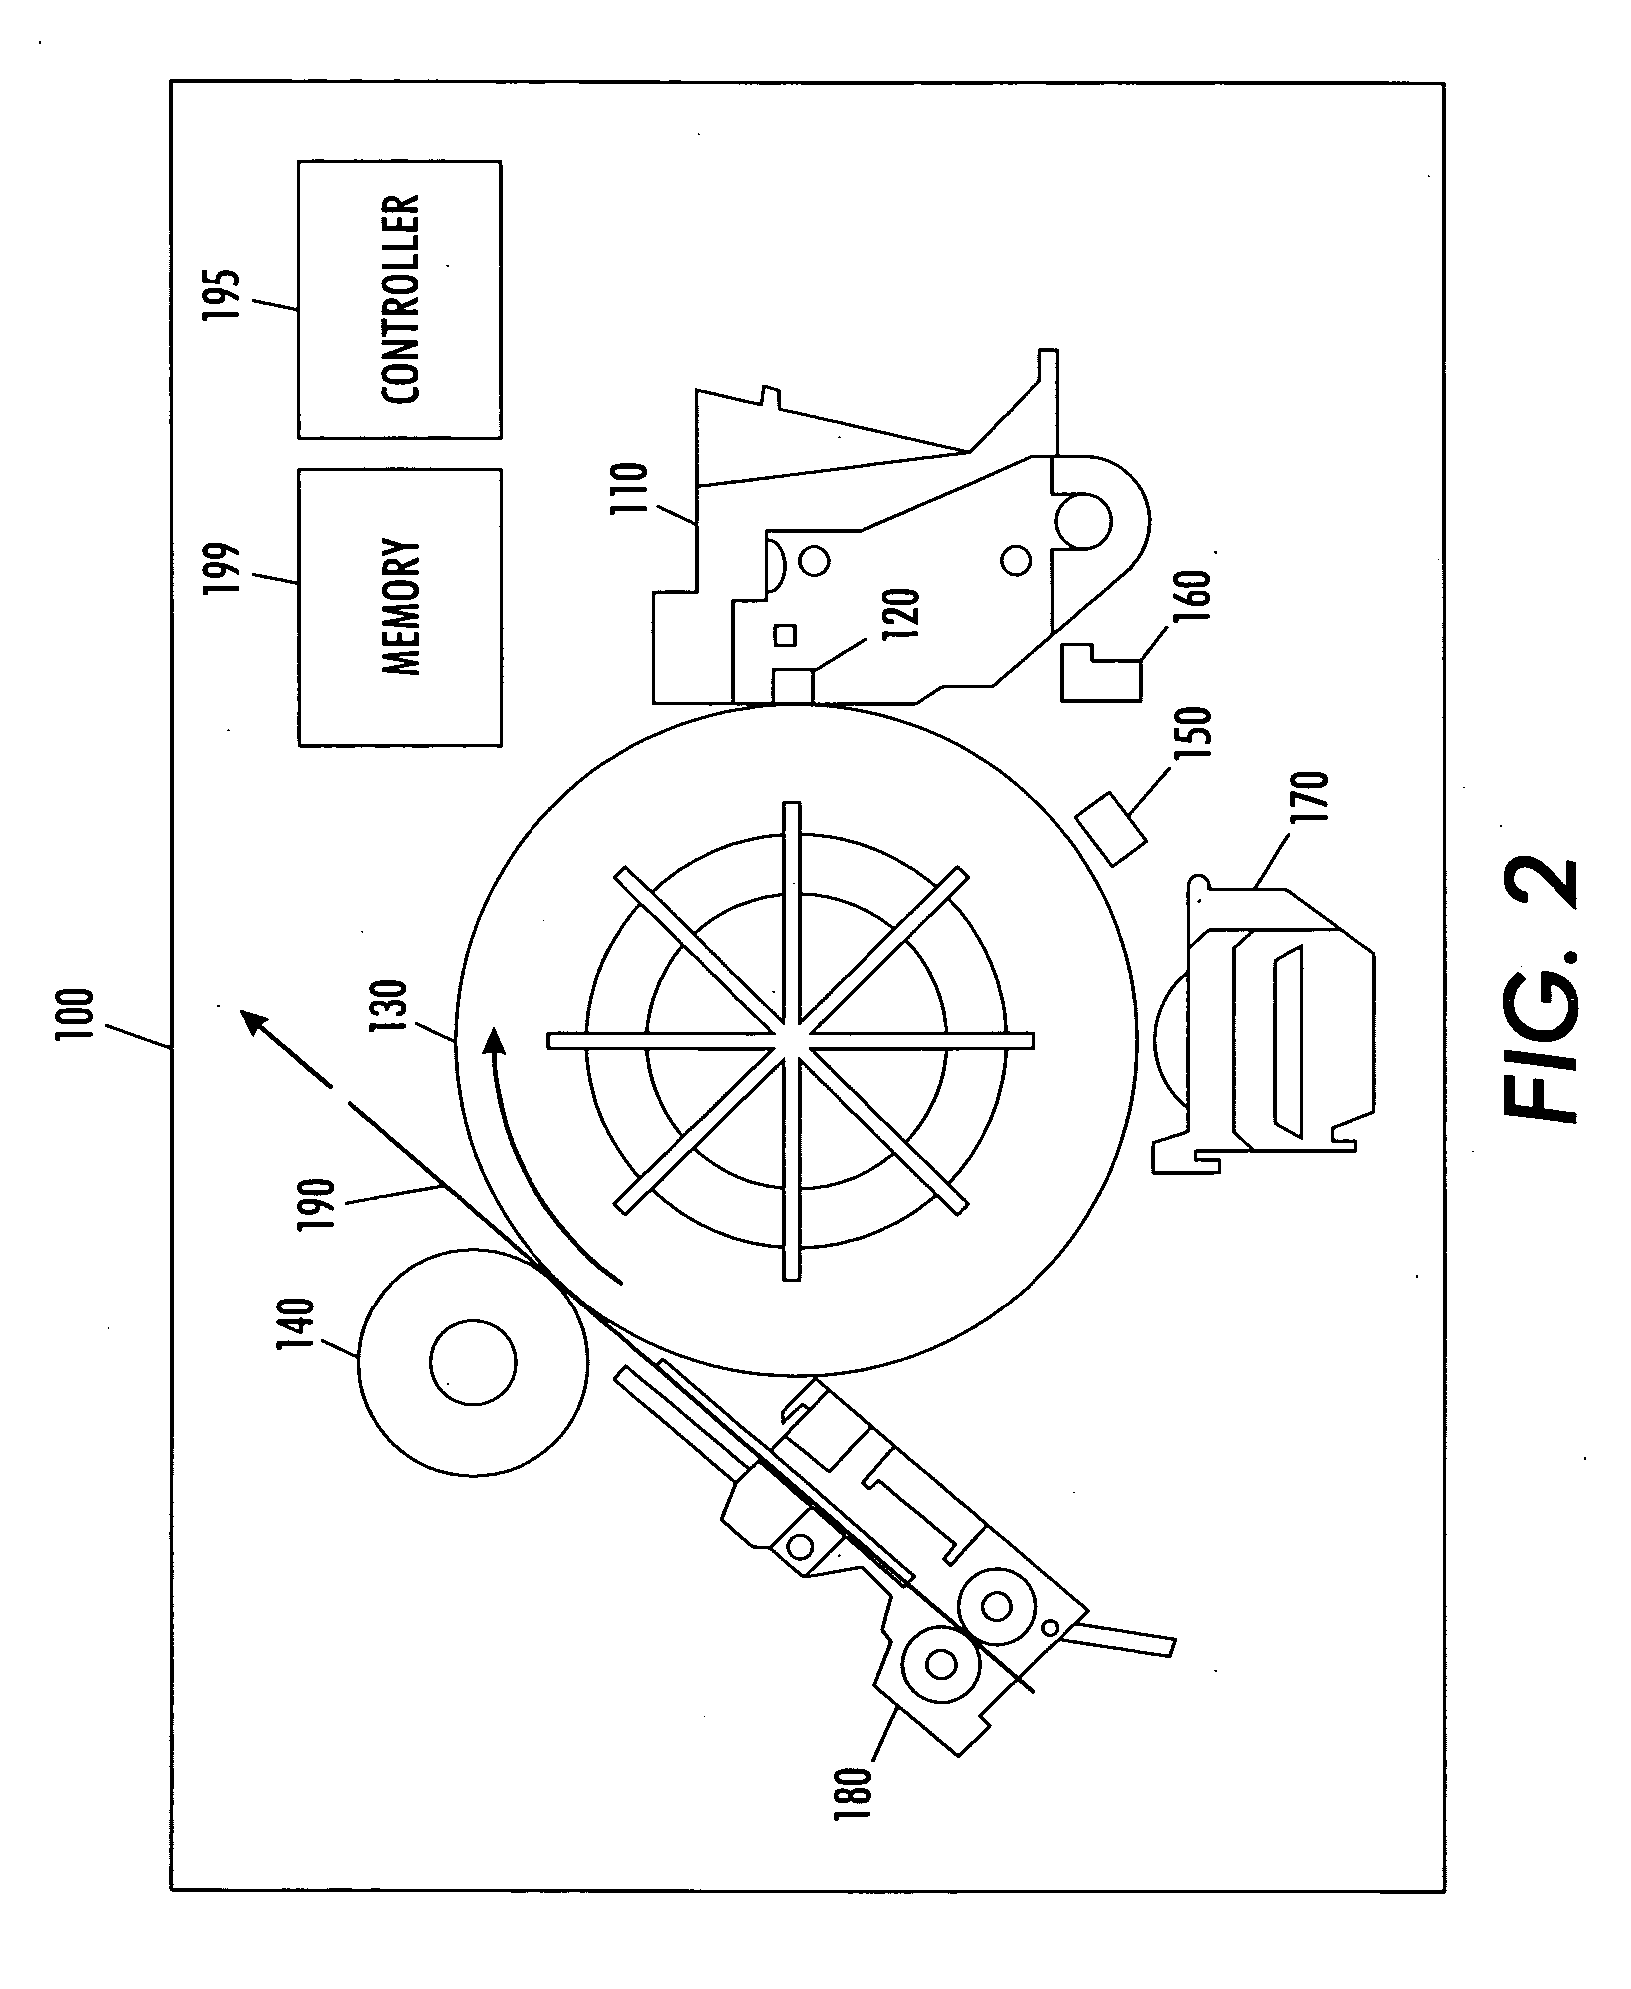 Systems and methods for detecting inkjet defects